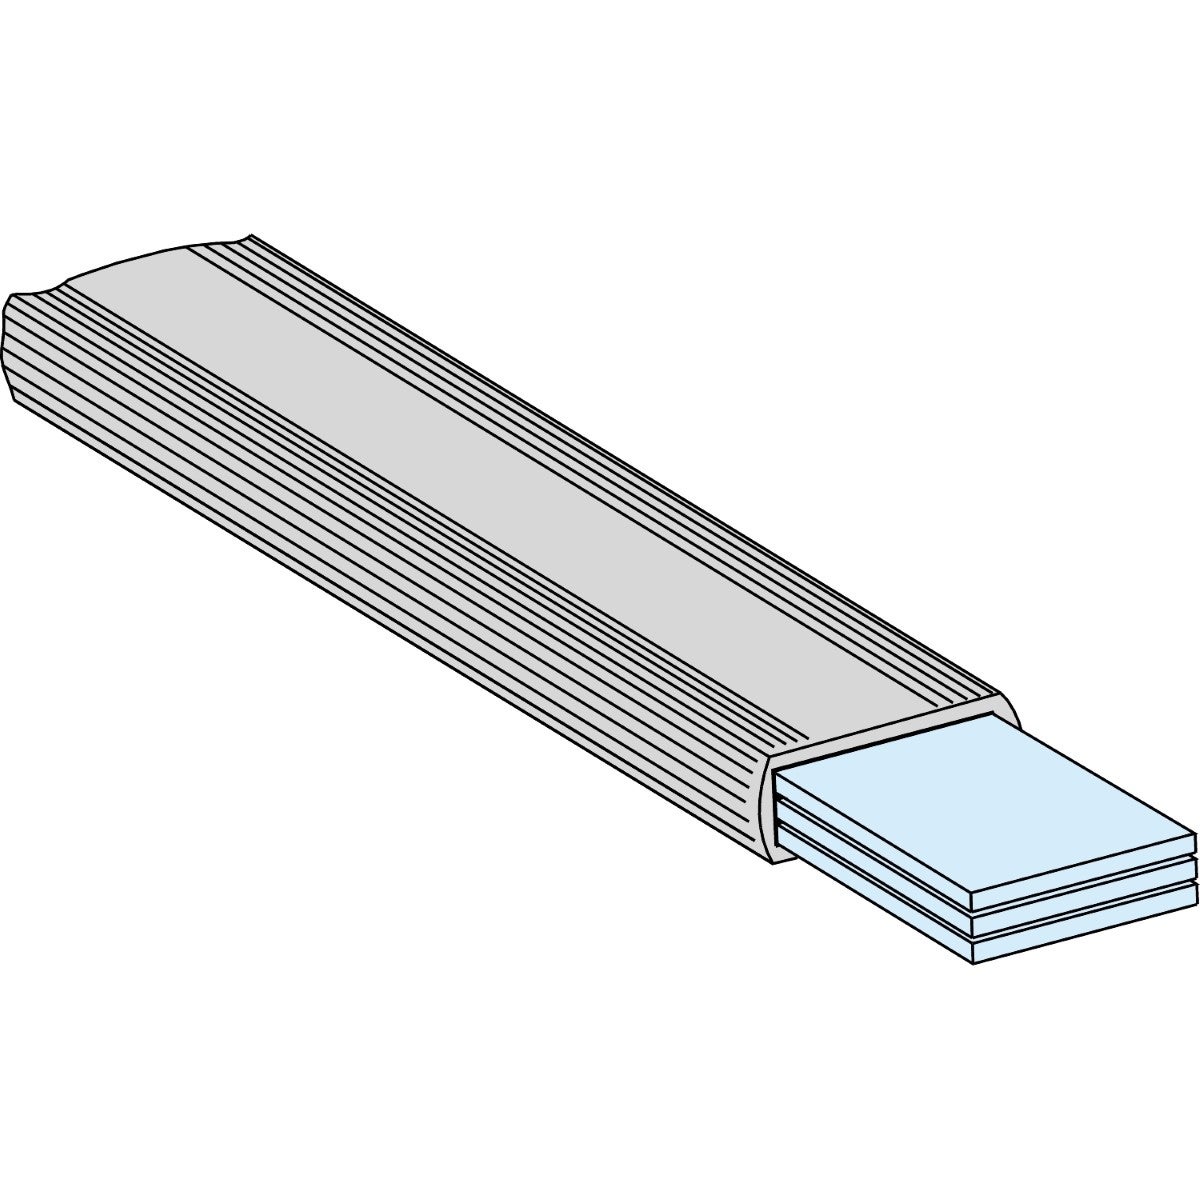 Insulated flexible bar, PrismaSeT P and G, 400 A, busbar size 24 x 5mm, length 1800mm, set of 1